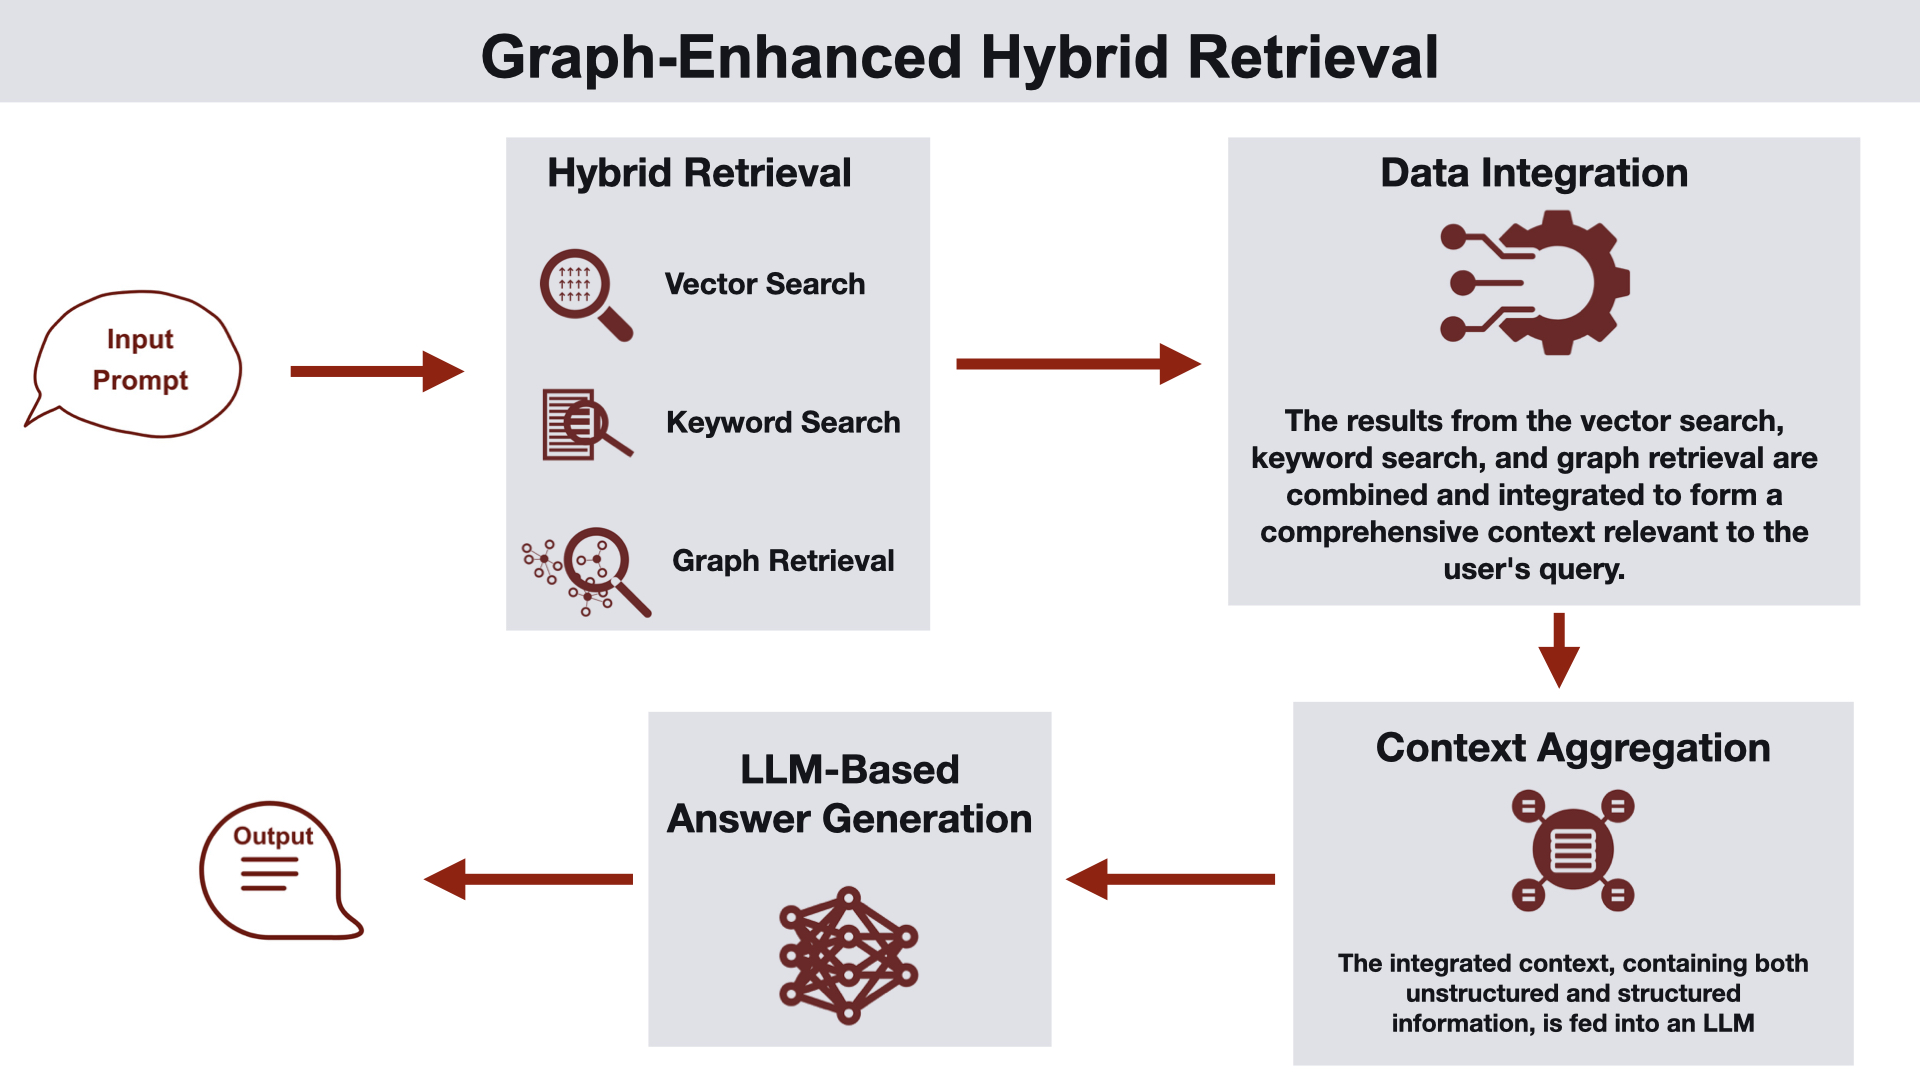 Graph-Enhanced Hybrid Retrieval is one of the Graph RAG architectures in Ben Lorica and Prashanth Rao’s classification